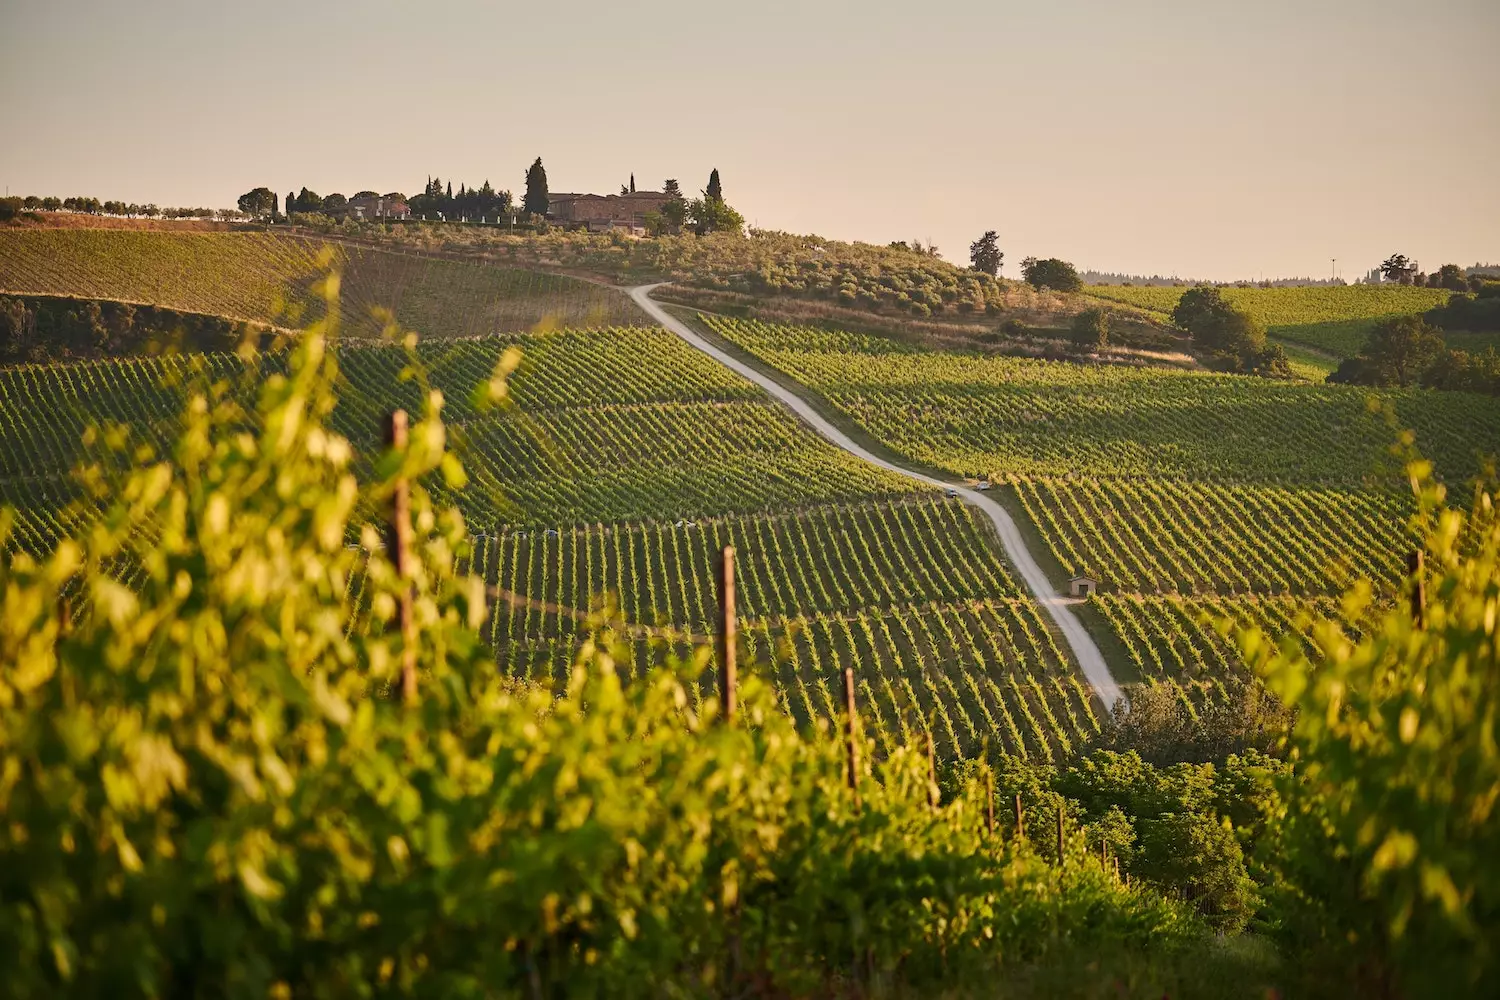 The lucky candidate will get a secondment at an Italian winery and explore the surrounding vineyards (